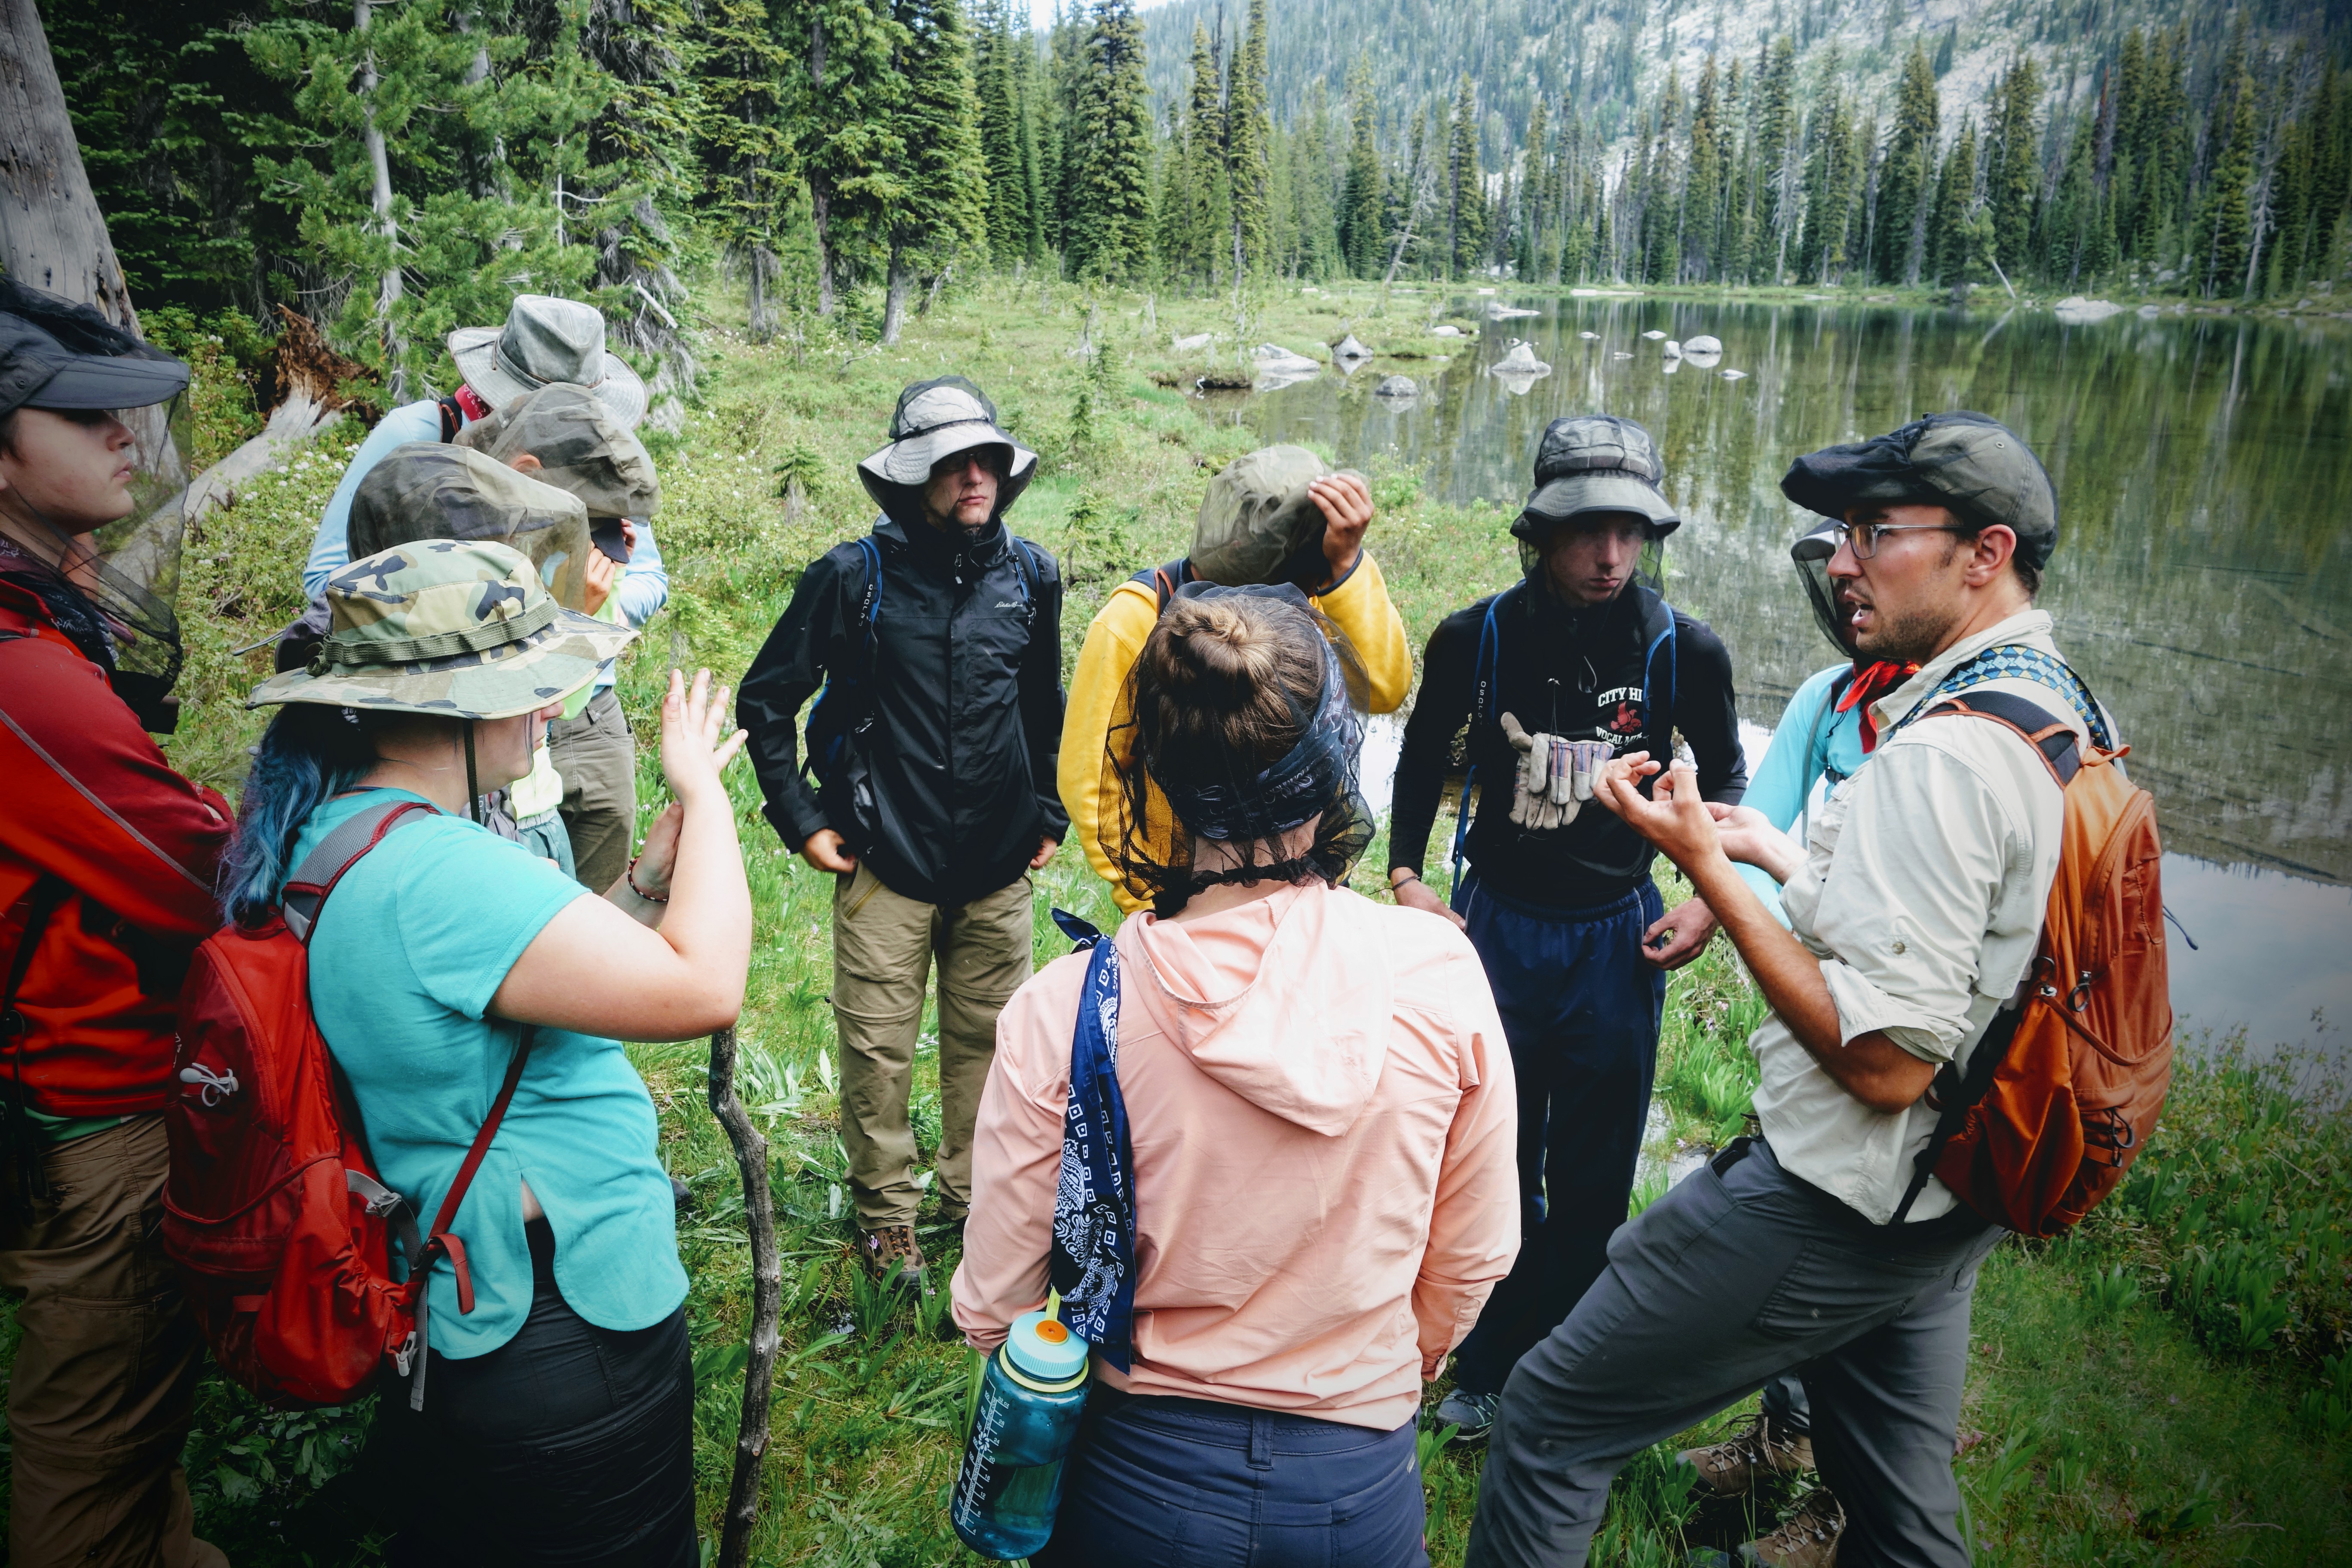 A trip leader speaks near a lake while a group of high school students is circled around him listening.